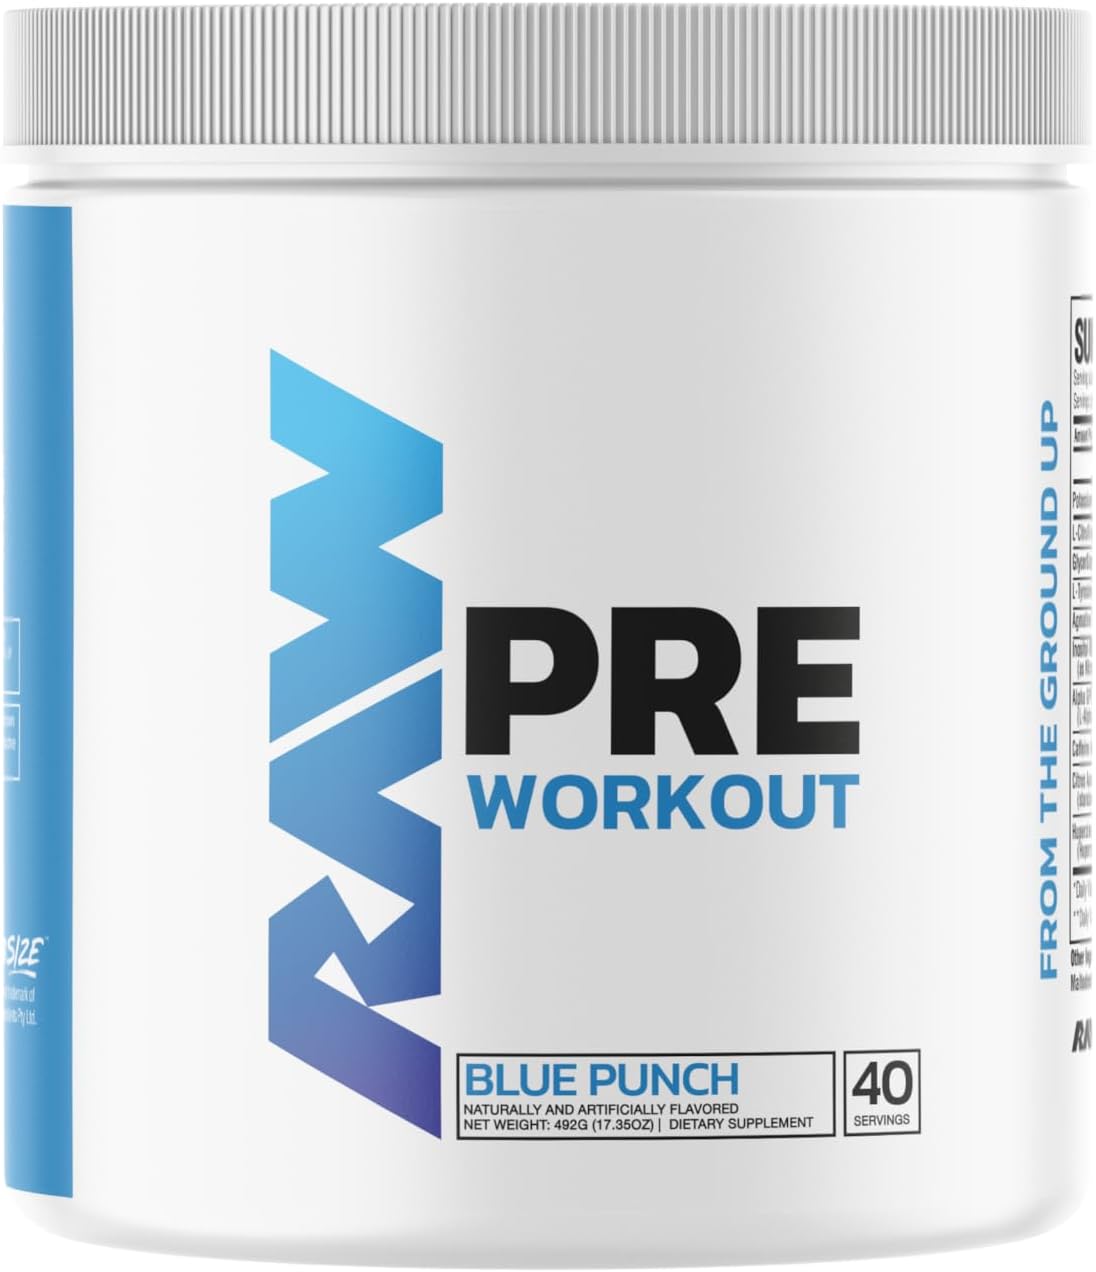 RAW Pre Workout Powder Supplement | Laser Focus Enhancer, Explosive Strength, Surge in Energy, Powerful Pump, Optimal Training | Blue Punch (40 Servings) : Health & Household